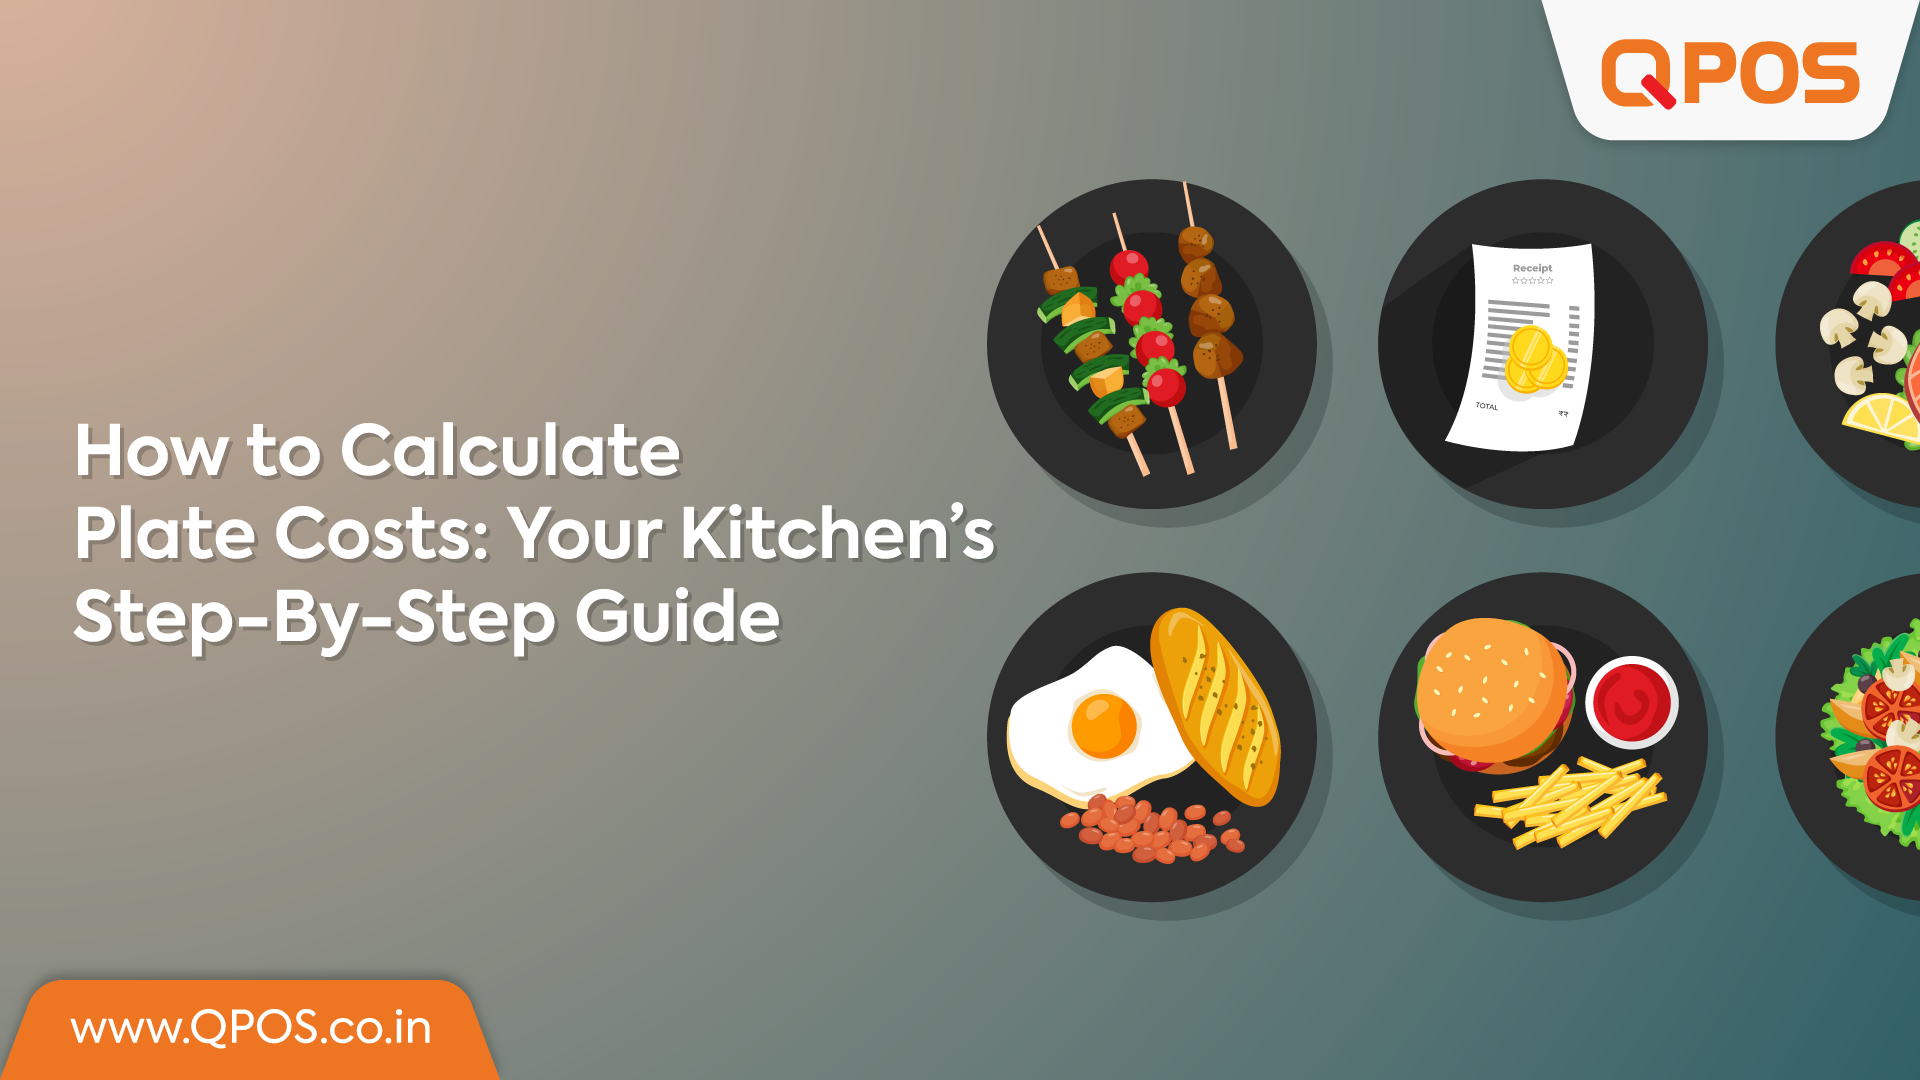 How to Calculate Plate Costs Your Kitchen’s Step-By-Step Guide-QPOS